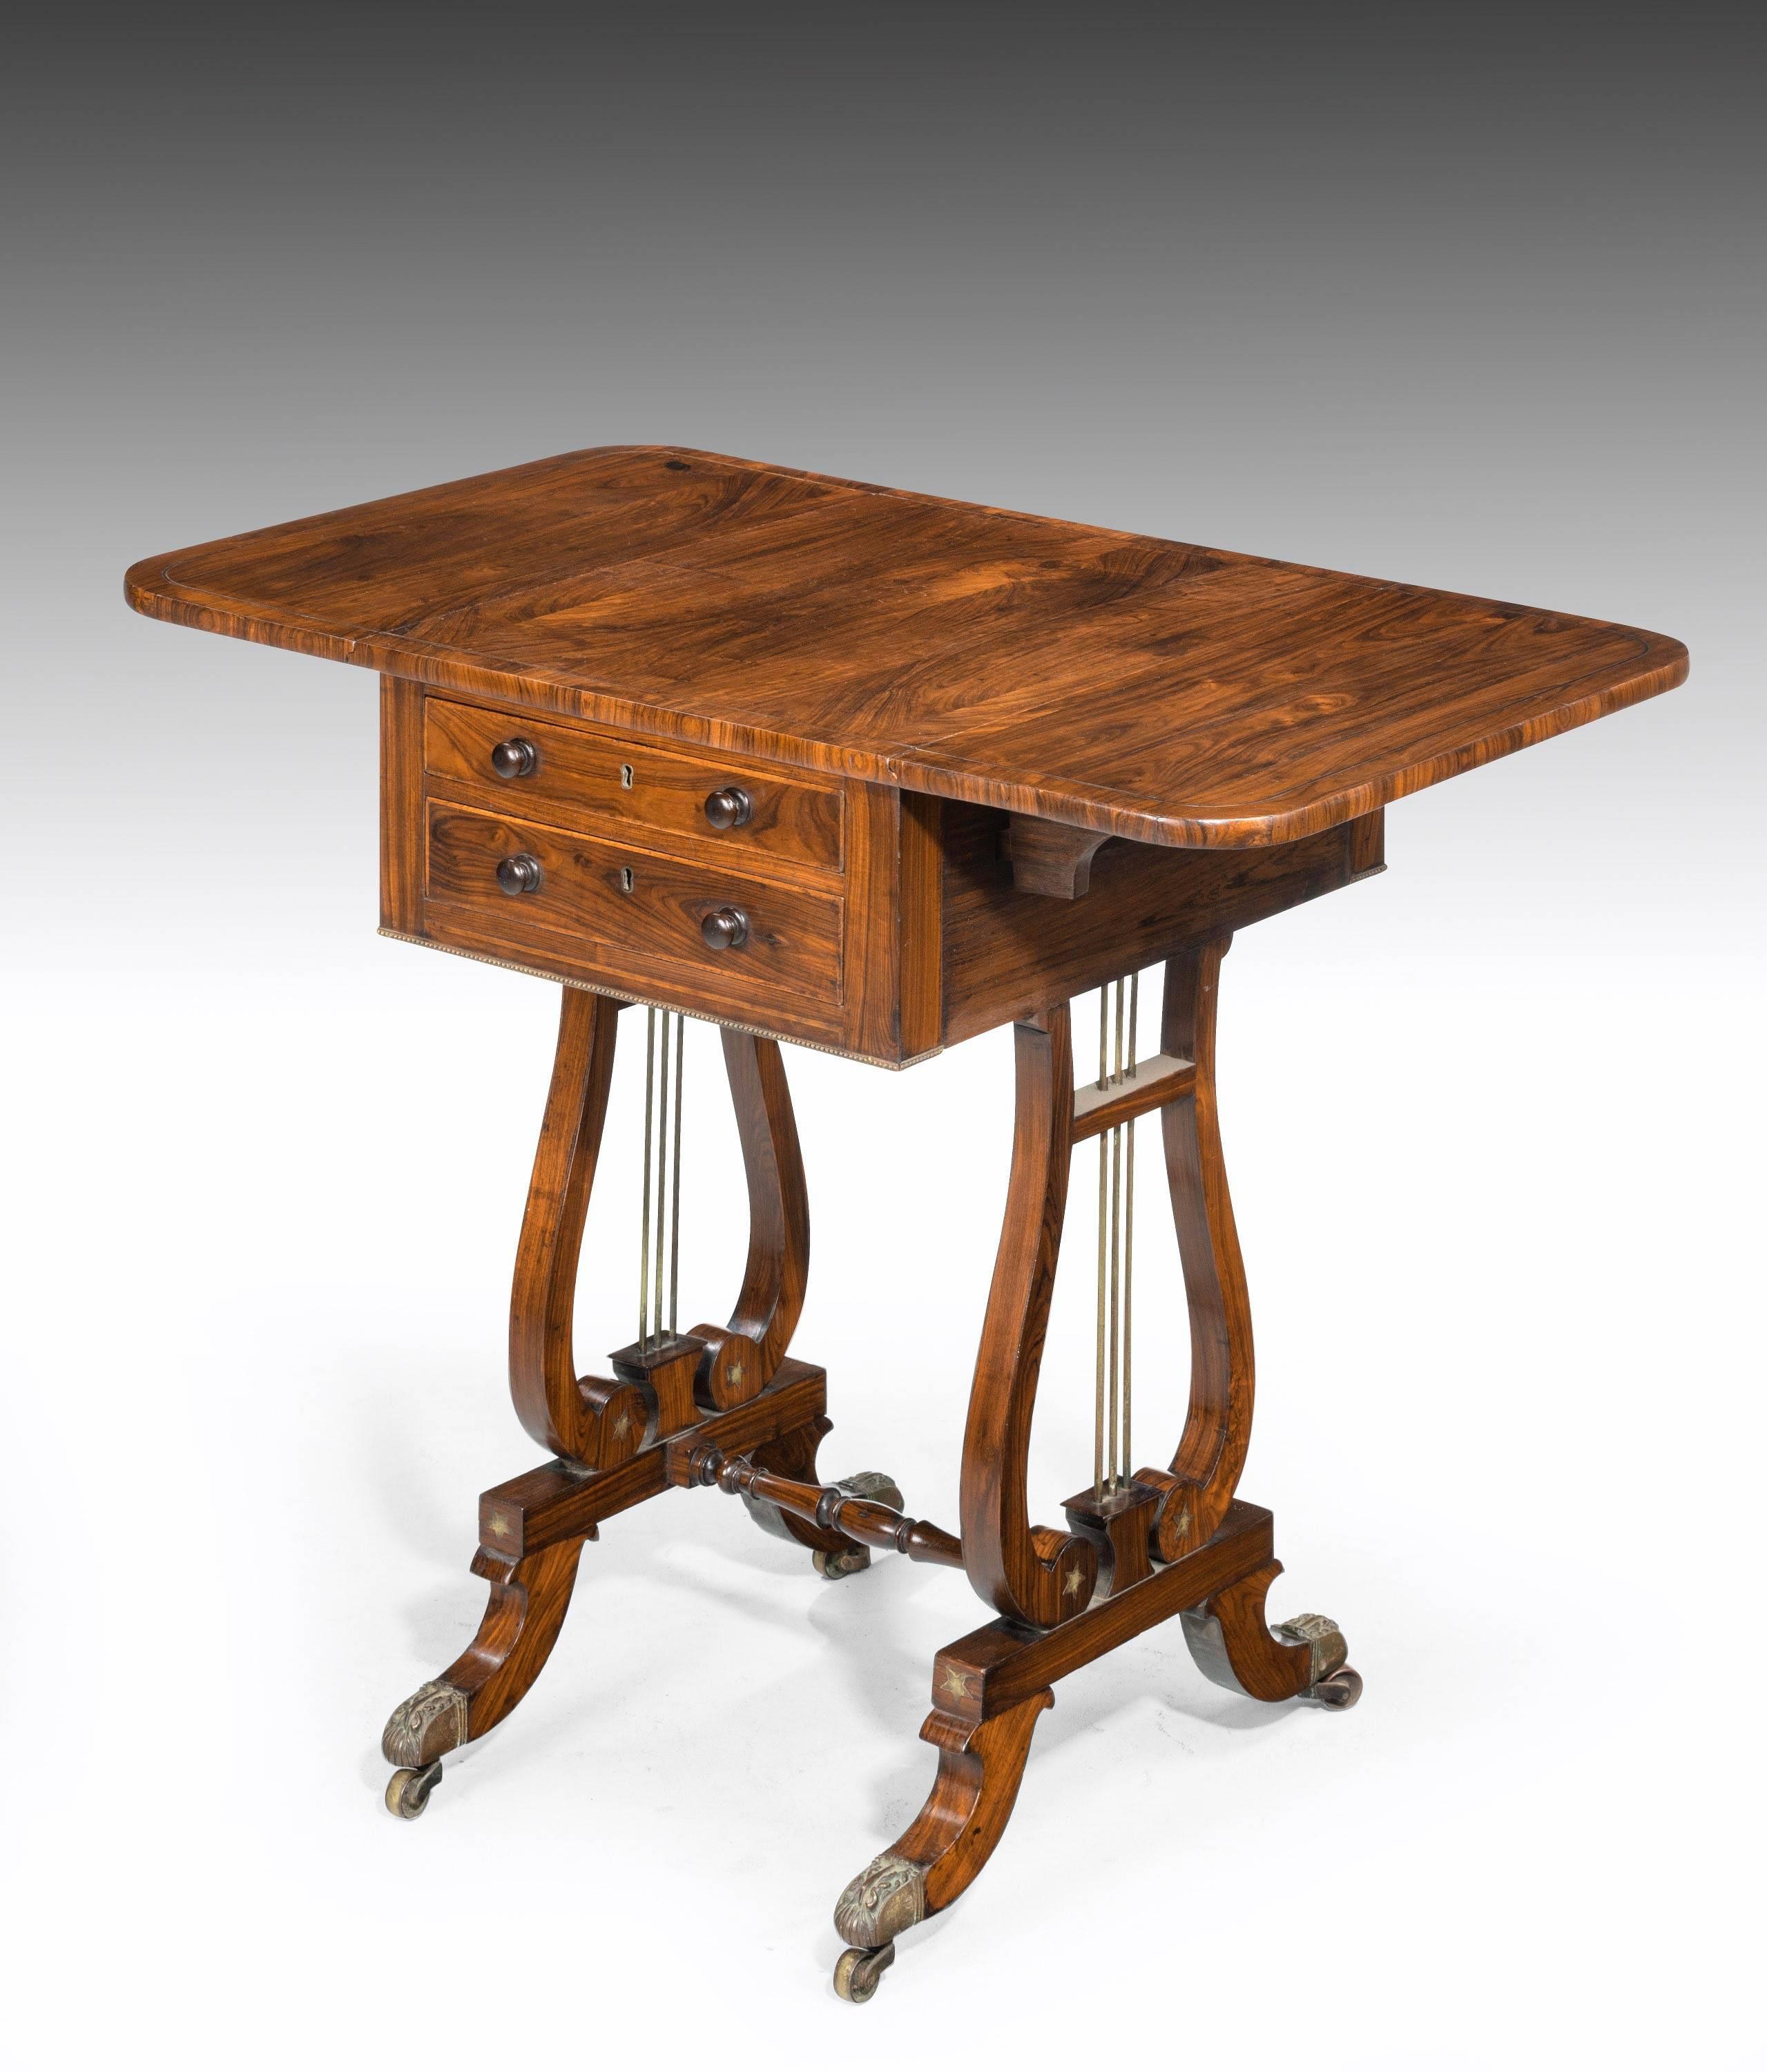 English Regency Period Rosewood Table of Small Proportions